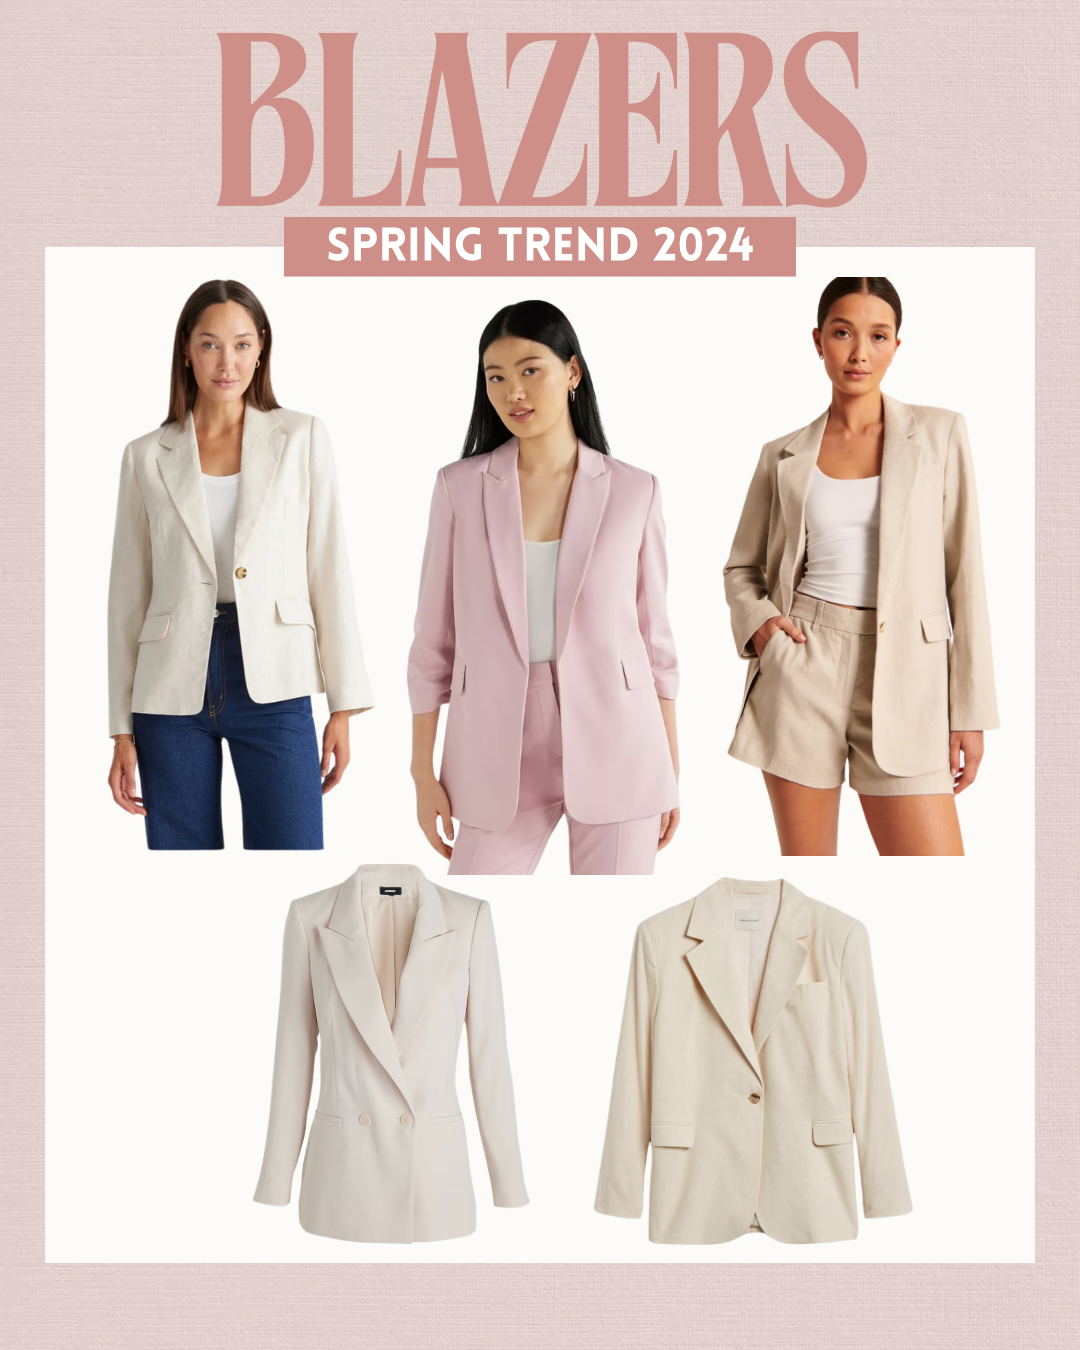 What are the fashion trends for spring 2024? The 8 Best Spring 2024 Fashion Trends for Women | What is the hottest trend in 2024?